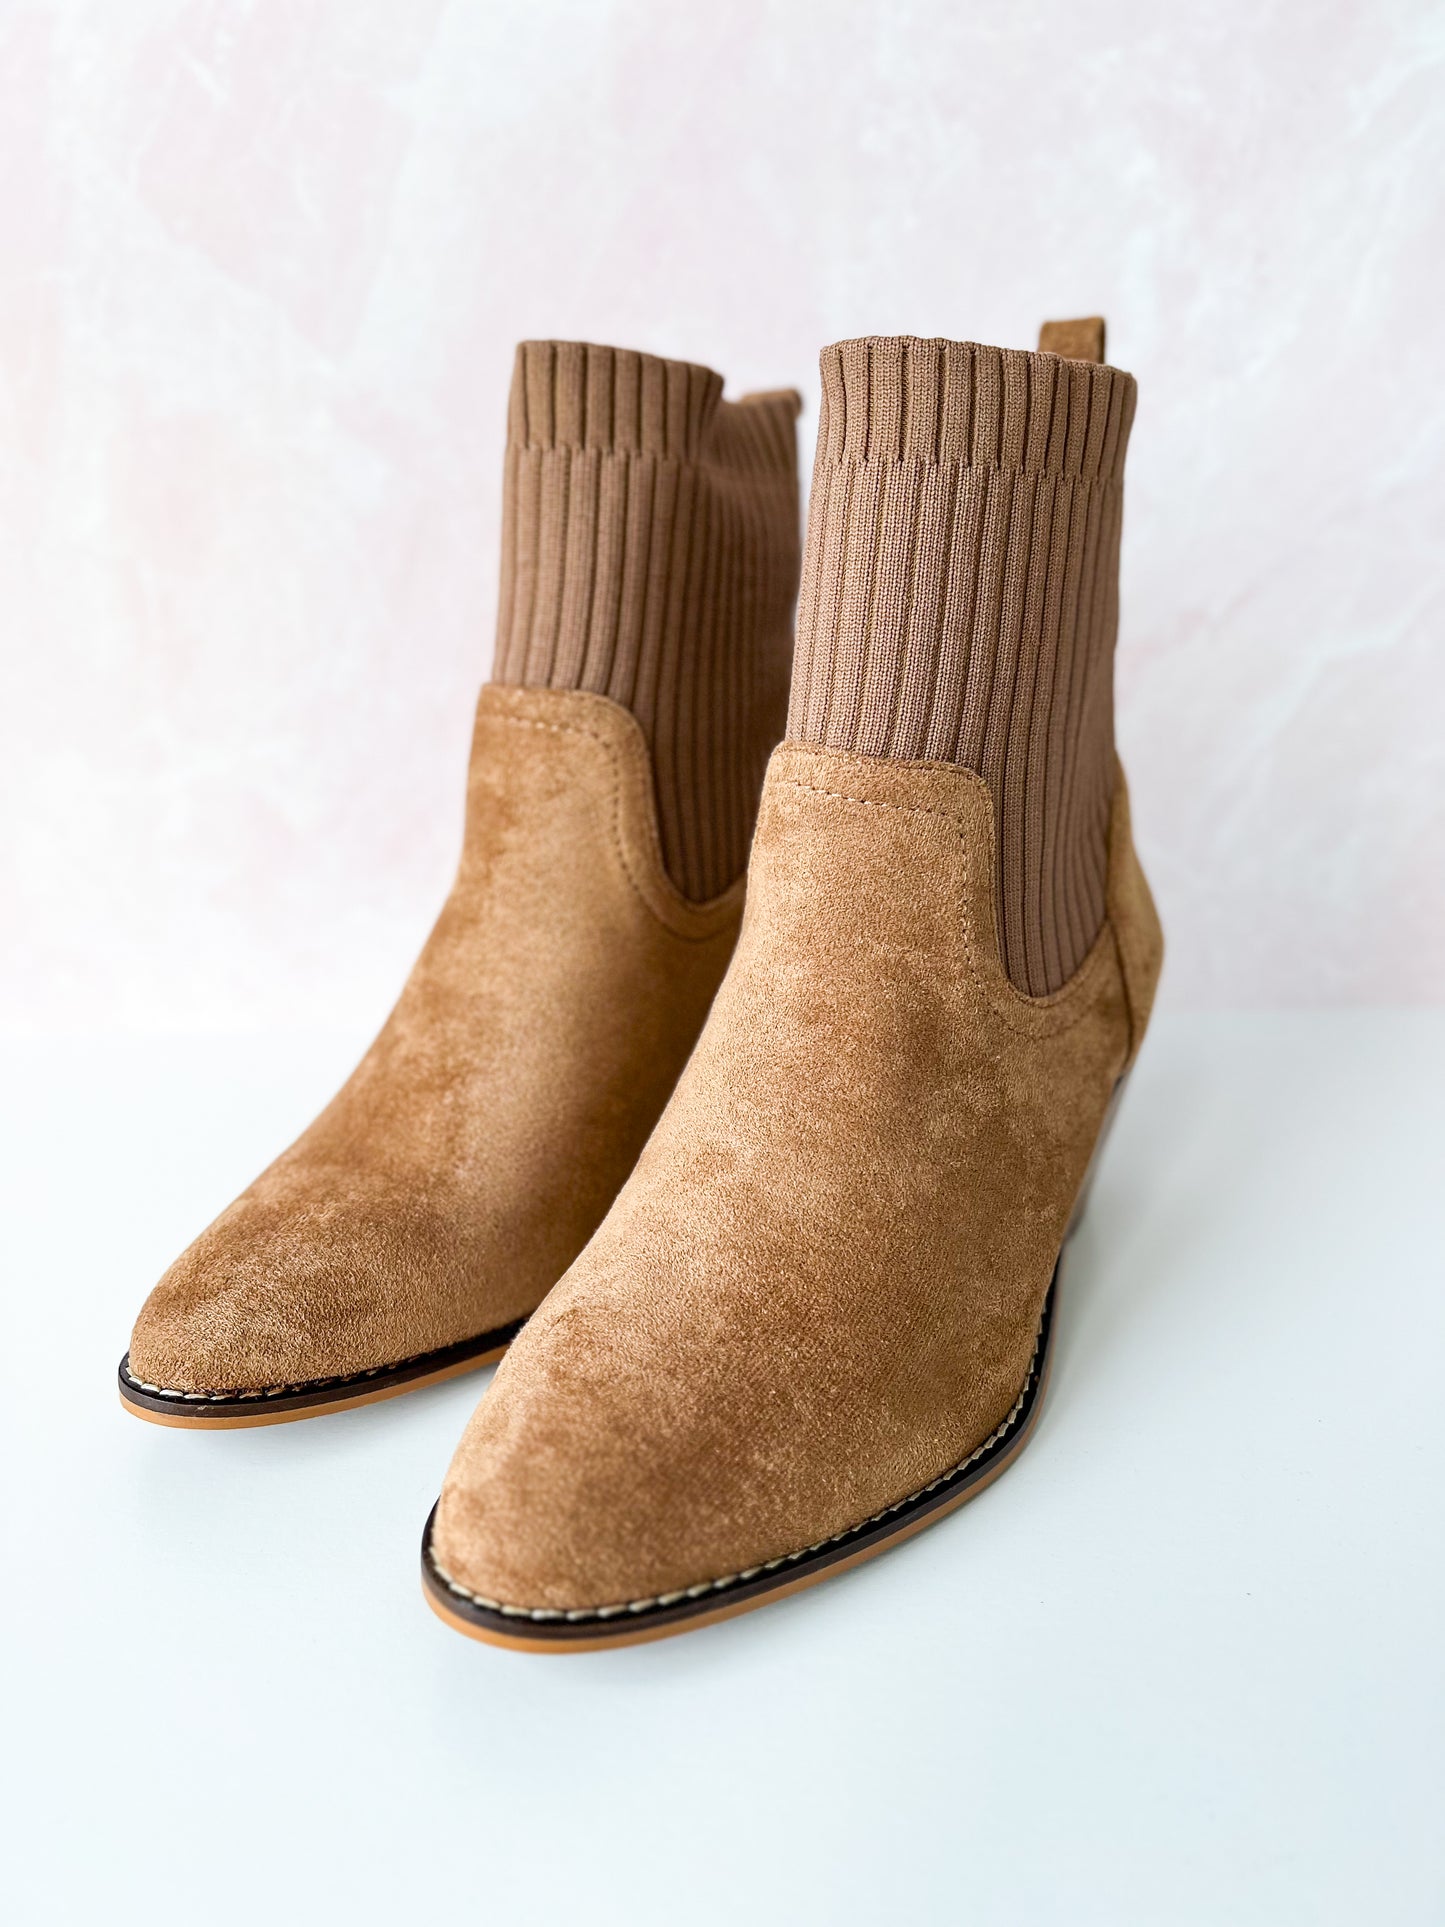 Corky's Crackling Boot - Camel Suede  - Final Sale